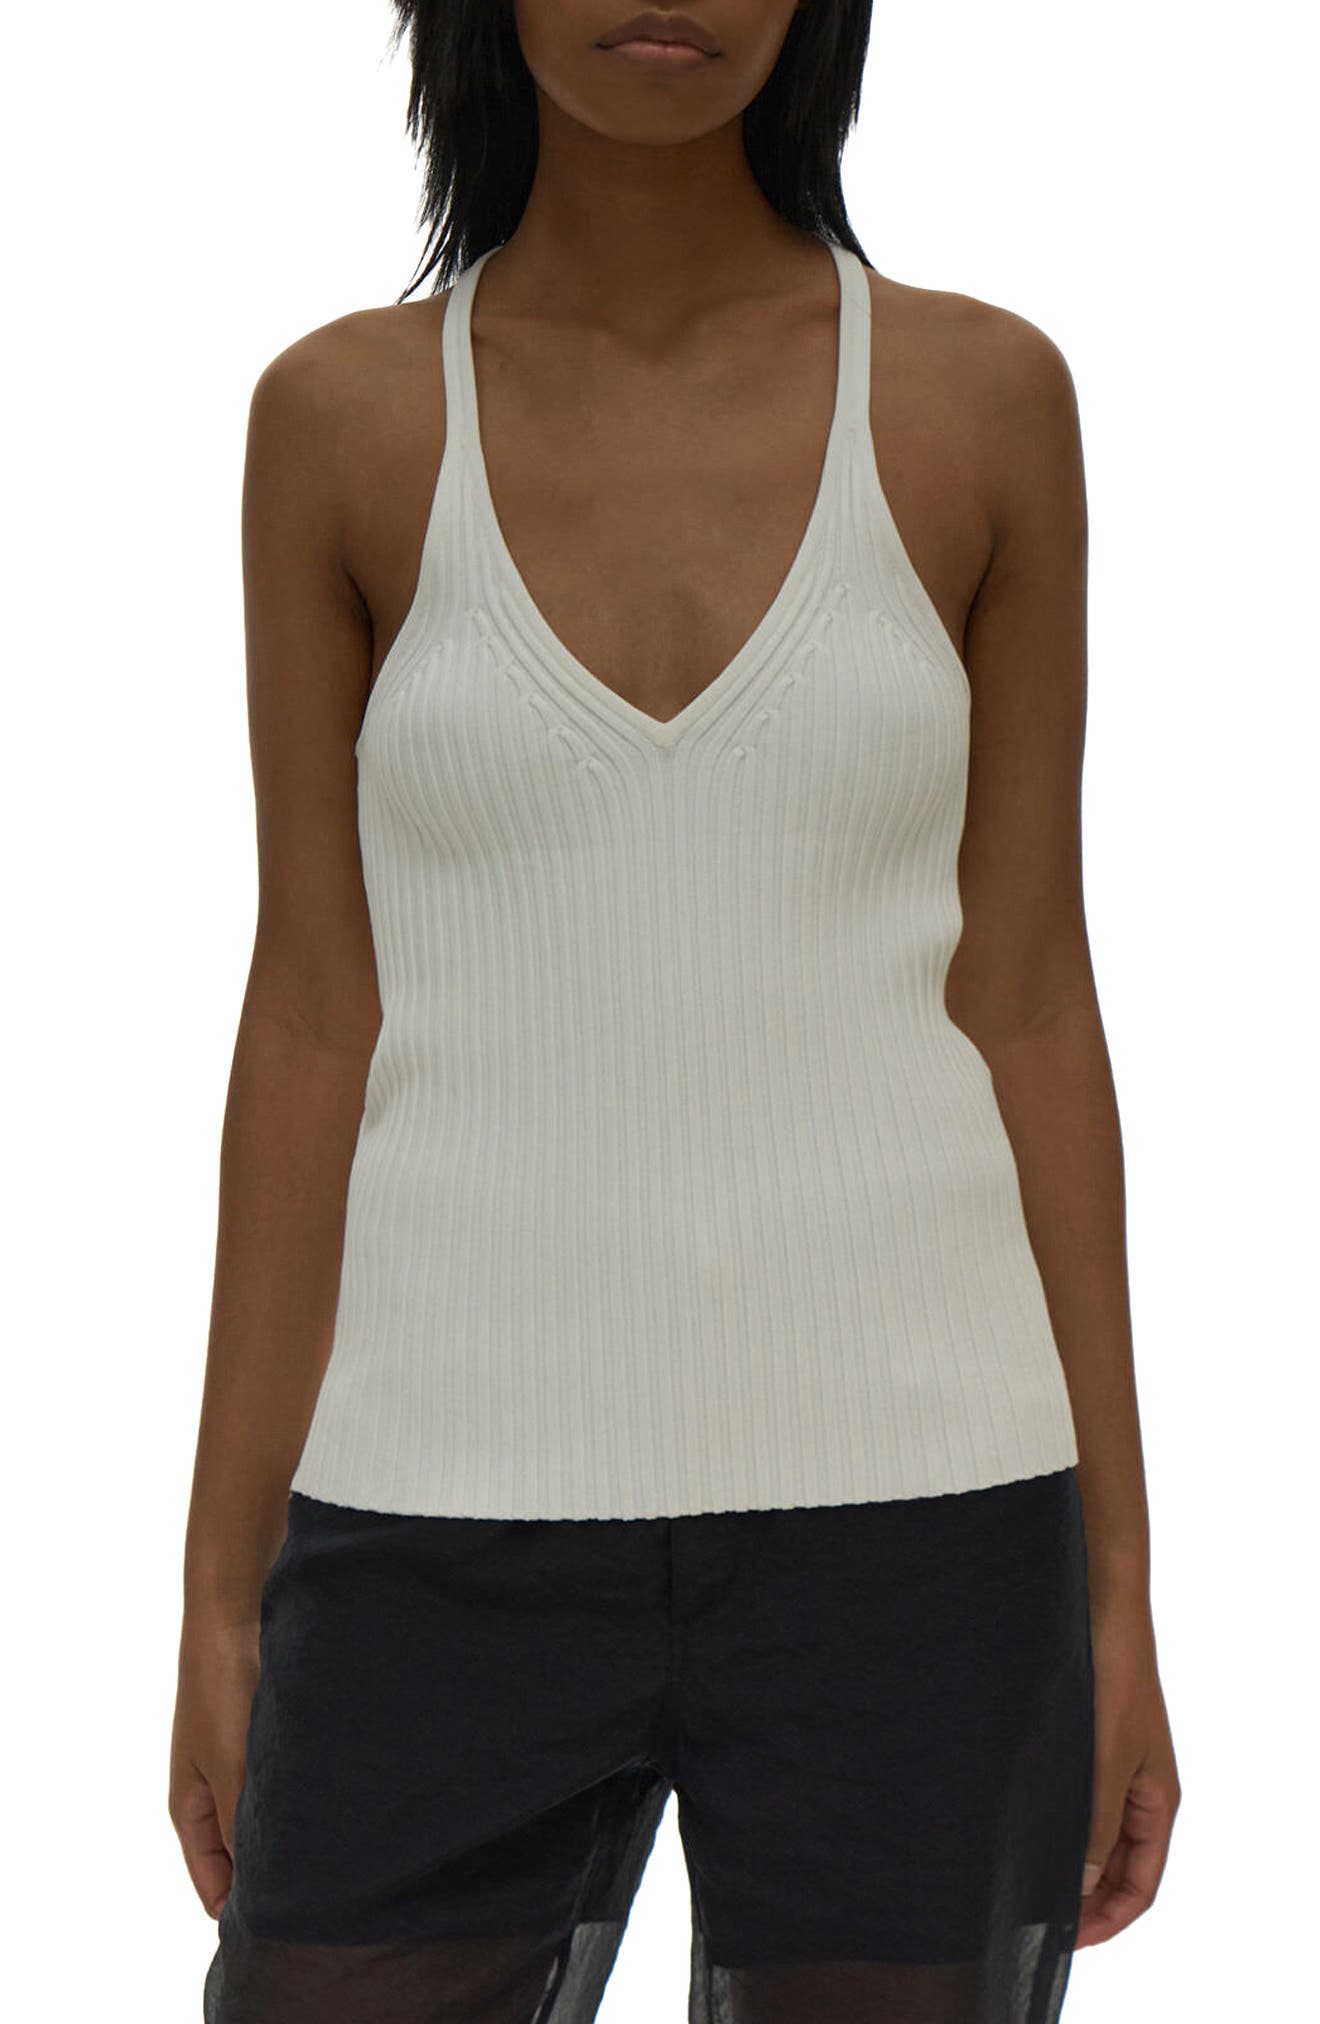 Helmut Lang Helmuit Lang Rib Tank Top in White/White at Nordstrom, Size X-Small